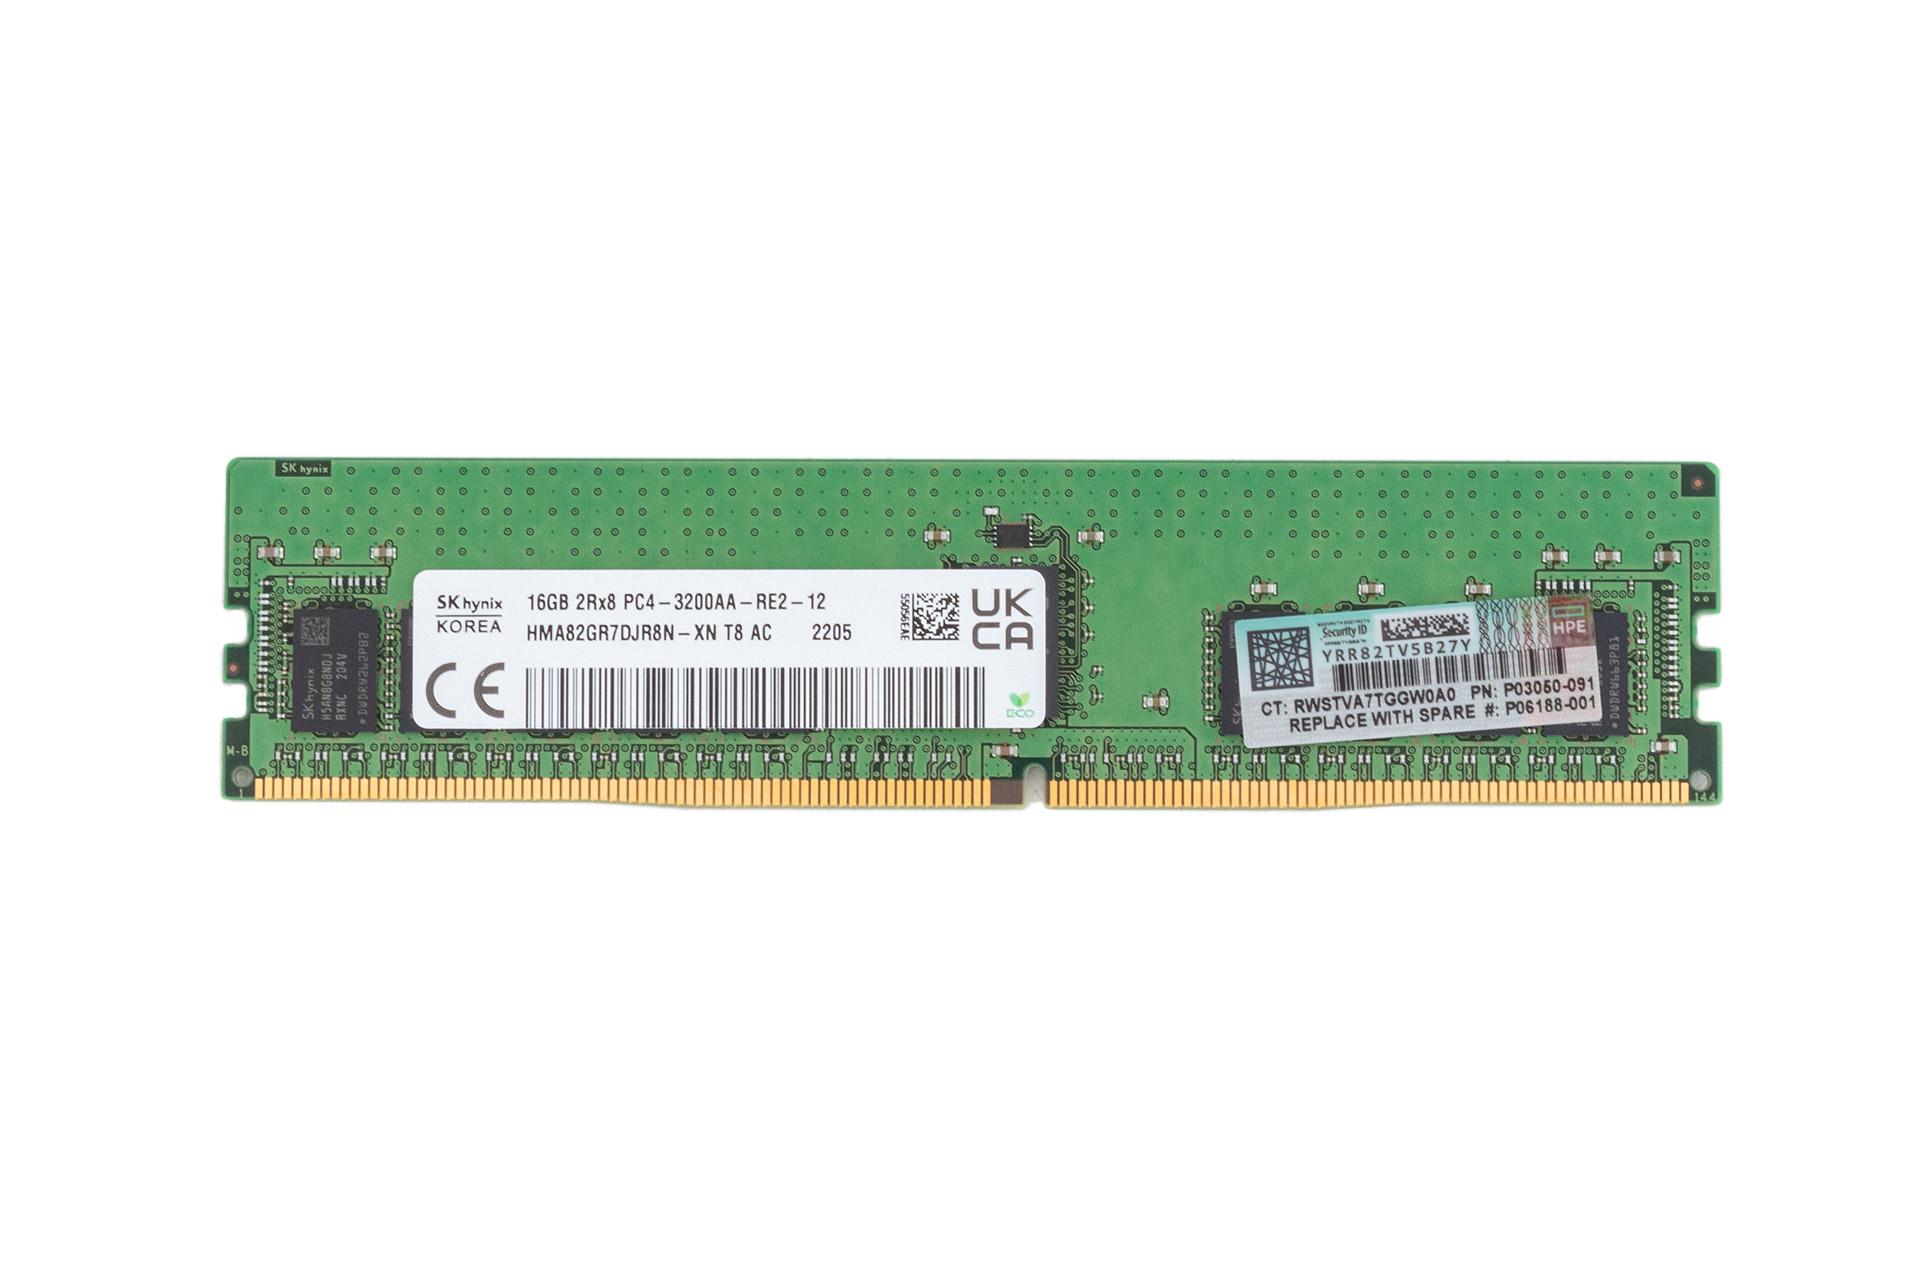 HPE RAM 16GB 2RX8 PC4-2933Y-R (or 3200AA) Smart Memory Kit, P06188-001